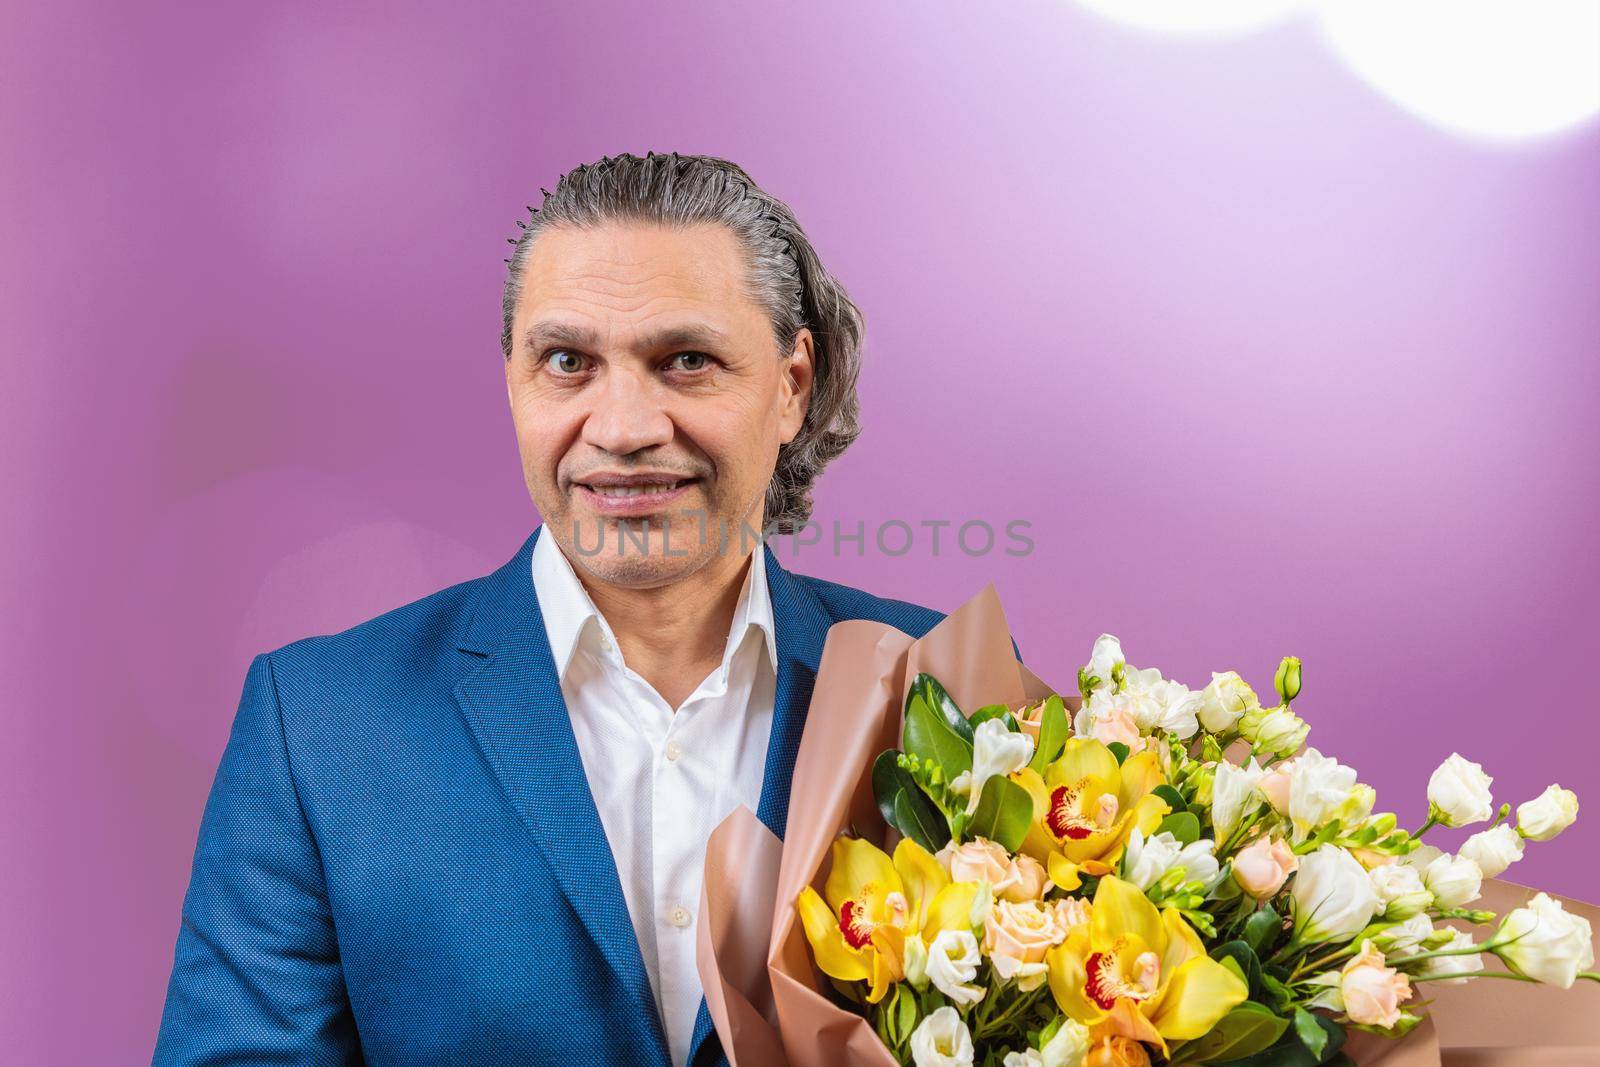 Smiling 50-year-old man in a blue jacket with a bouquet of flowers on a uniform background. Long gray hair